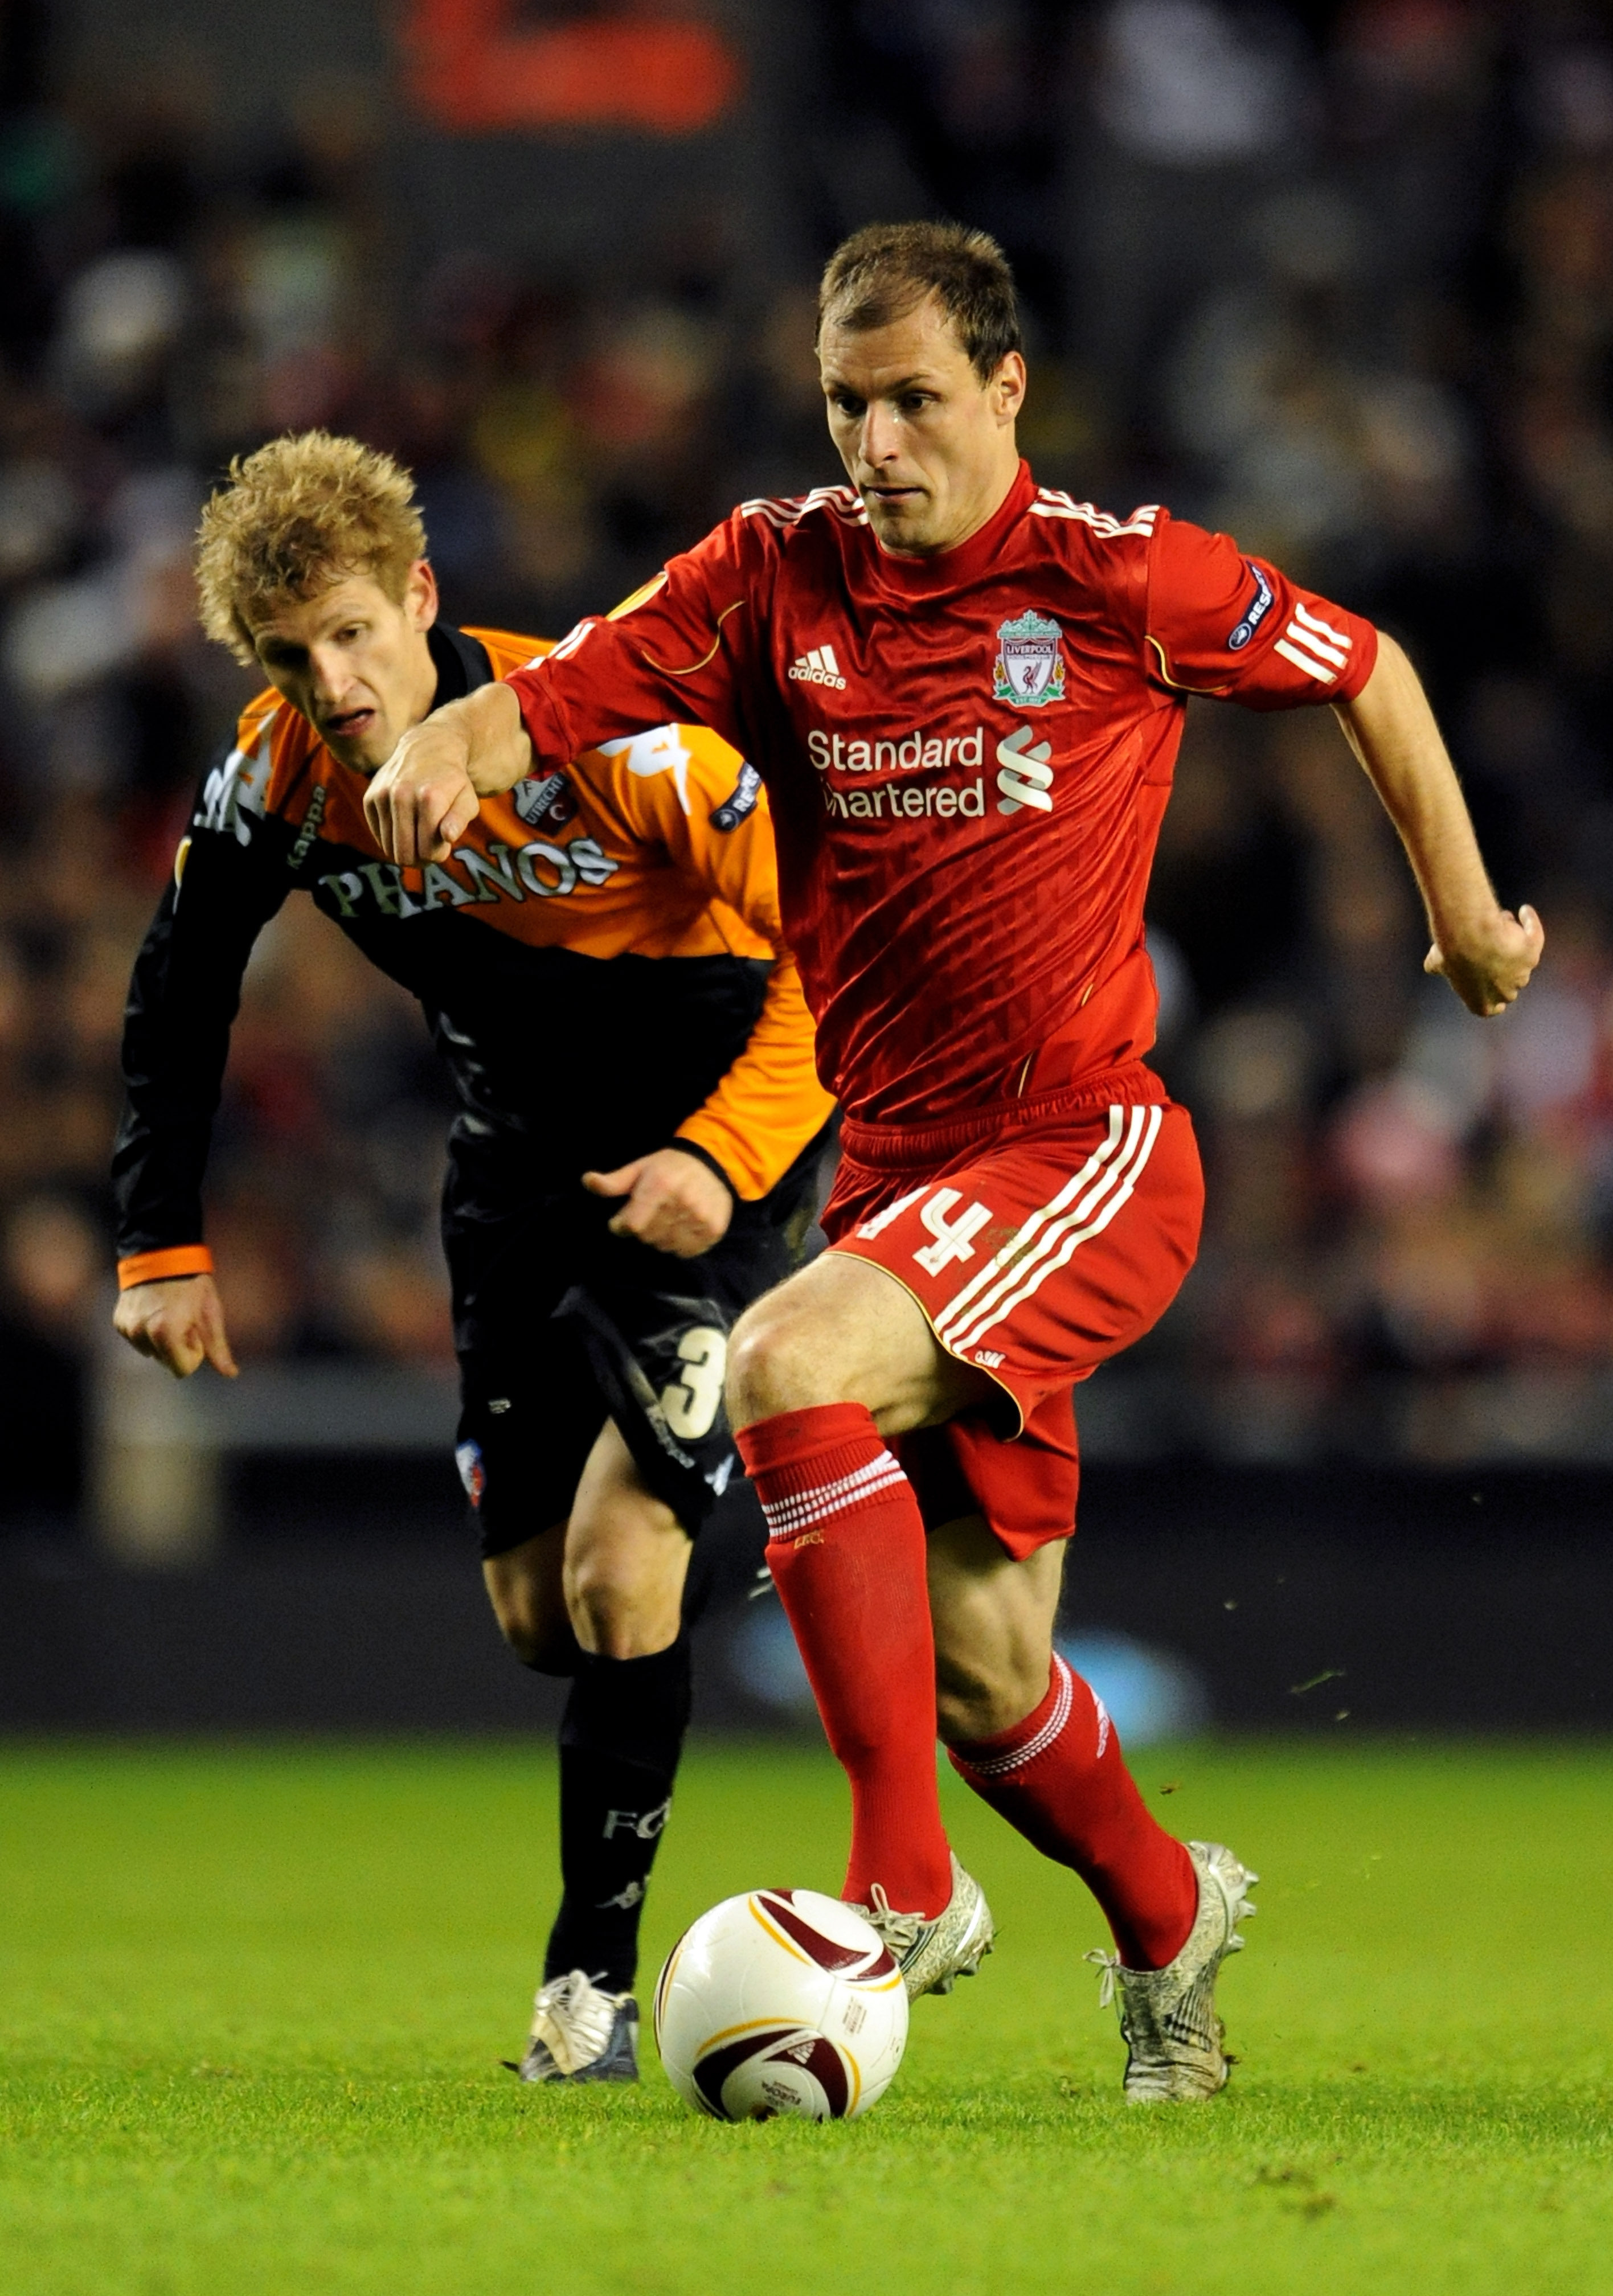 LIVERPOOL, ENGLAND - DECEMBER 15:  Milan Jovanovic of Liverpool is pursued by Mihai Nesu of FC Utrecht during the UEFA Europa League Group K match between Liverpool and FC Utrecht at Anfield on December 15, 2010 in Liverpool, England.  (Photo by Clint Hug